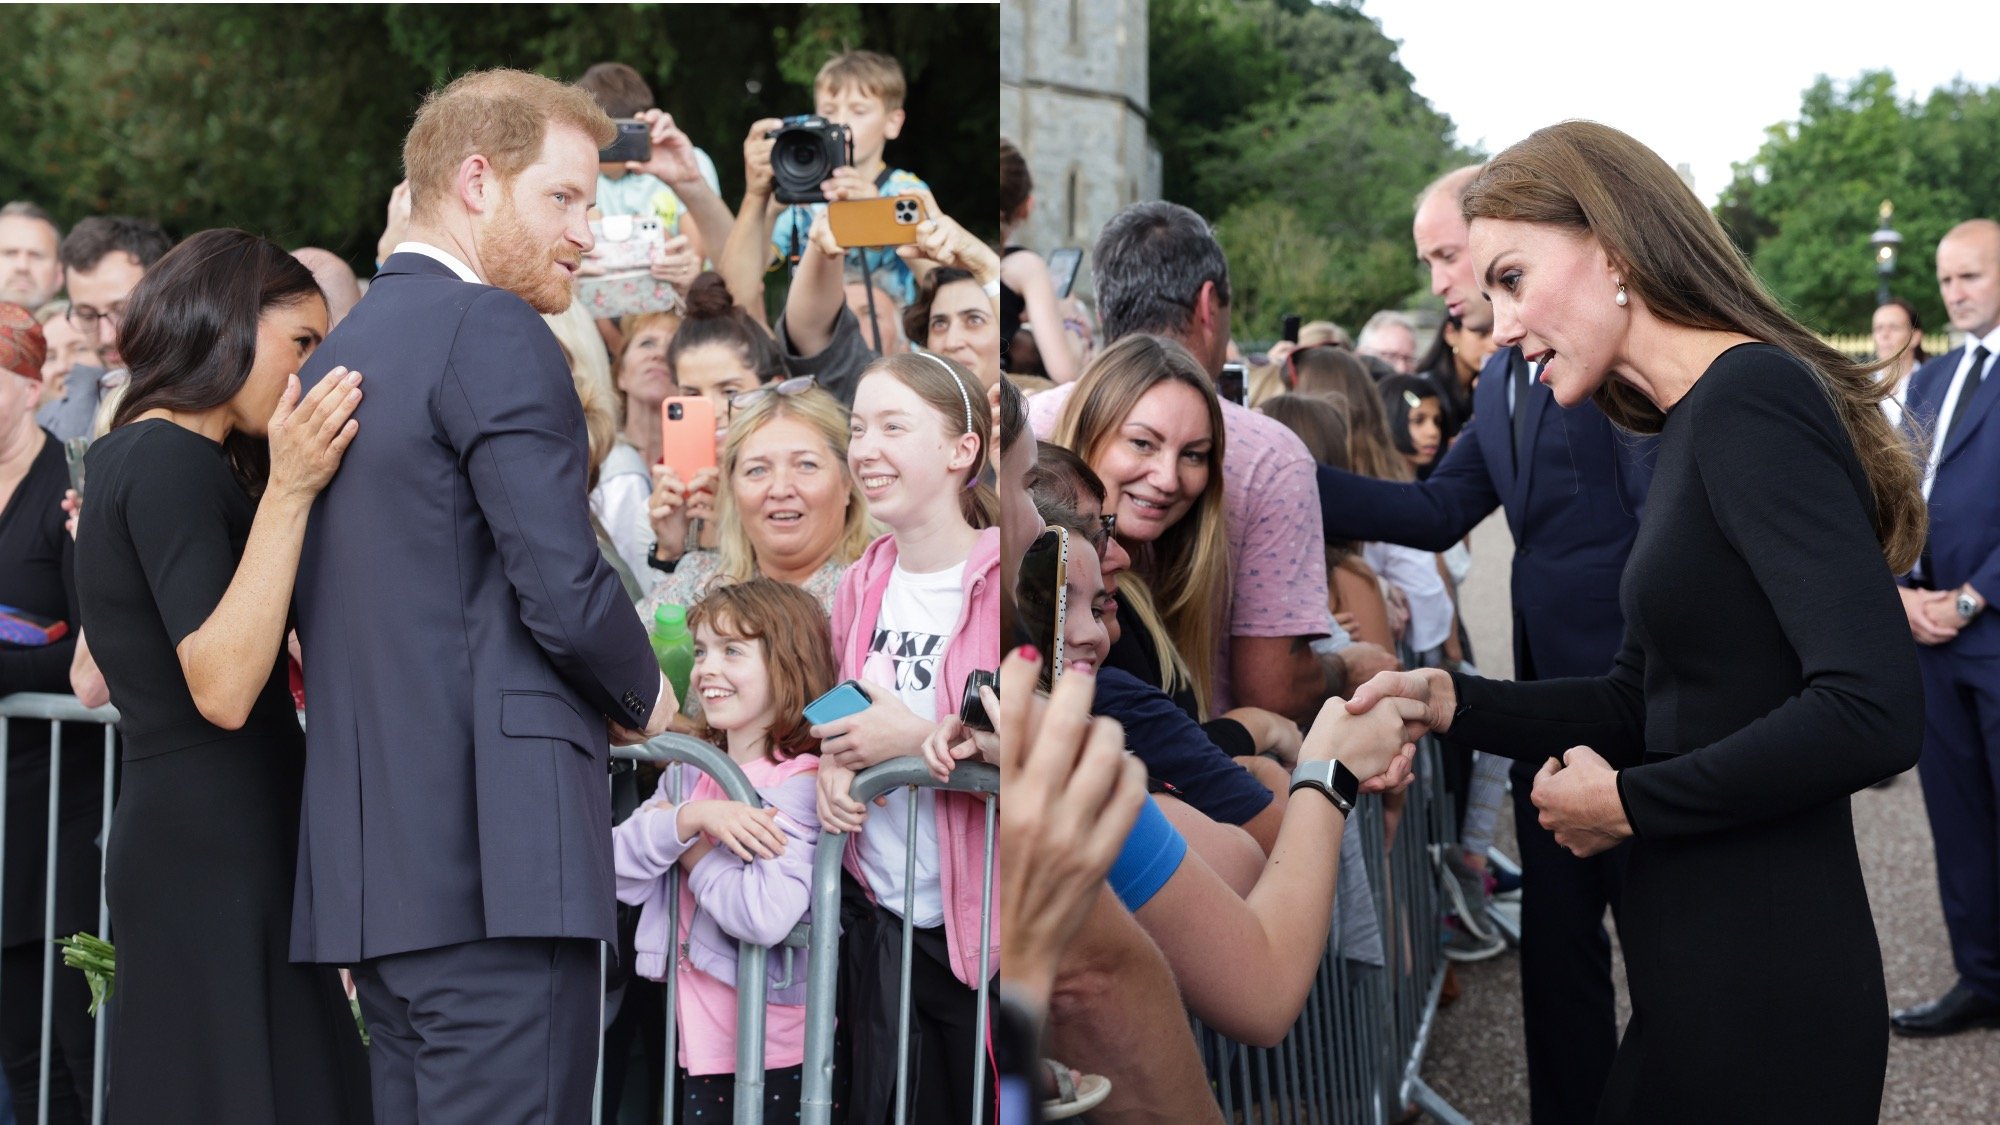 A body language expert pointed out how Prince Harry and Meghan Markle (L) manage crowds differently than Prince William and Kate Middleton (R).